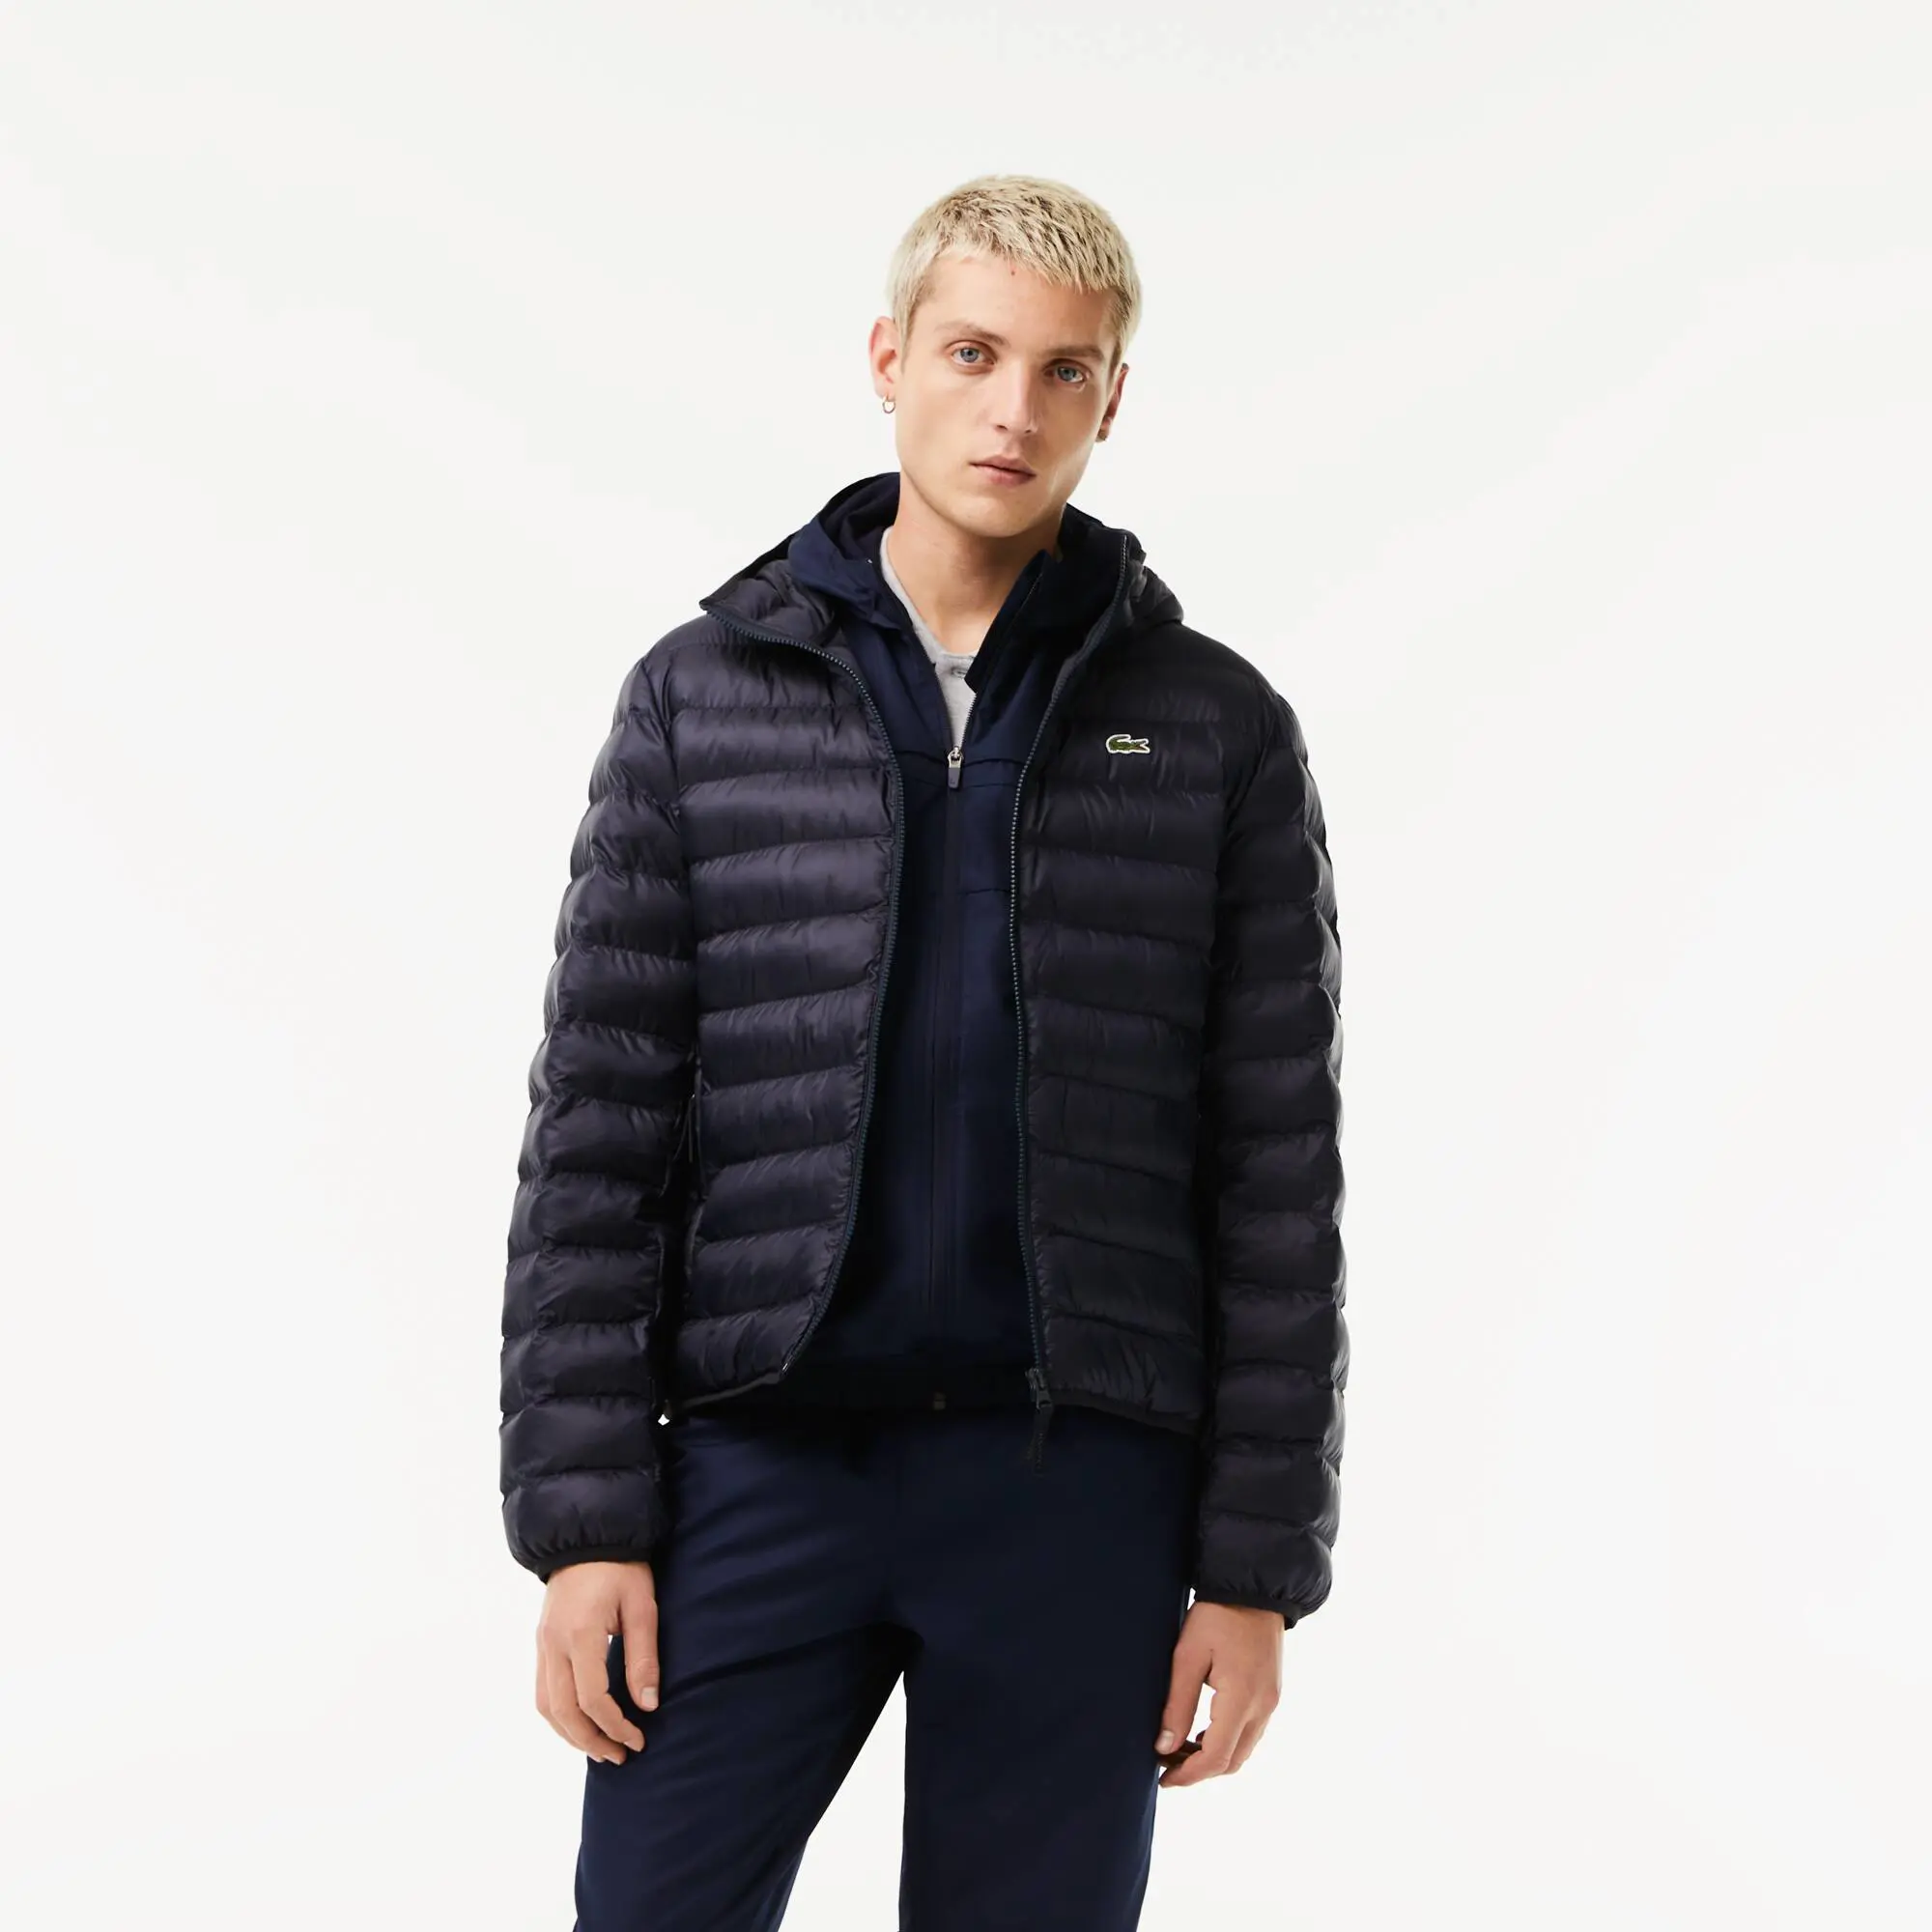 Lacoste Men's Lacoste Quilted Hooded Short Jacket. 1